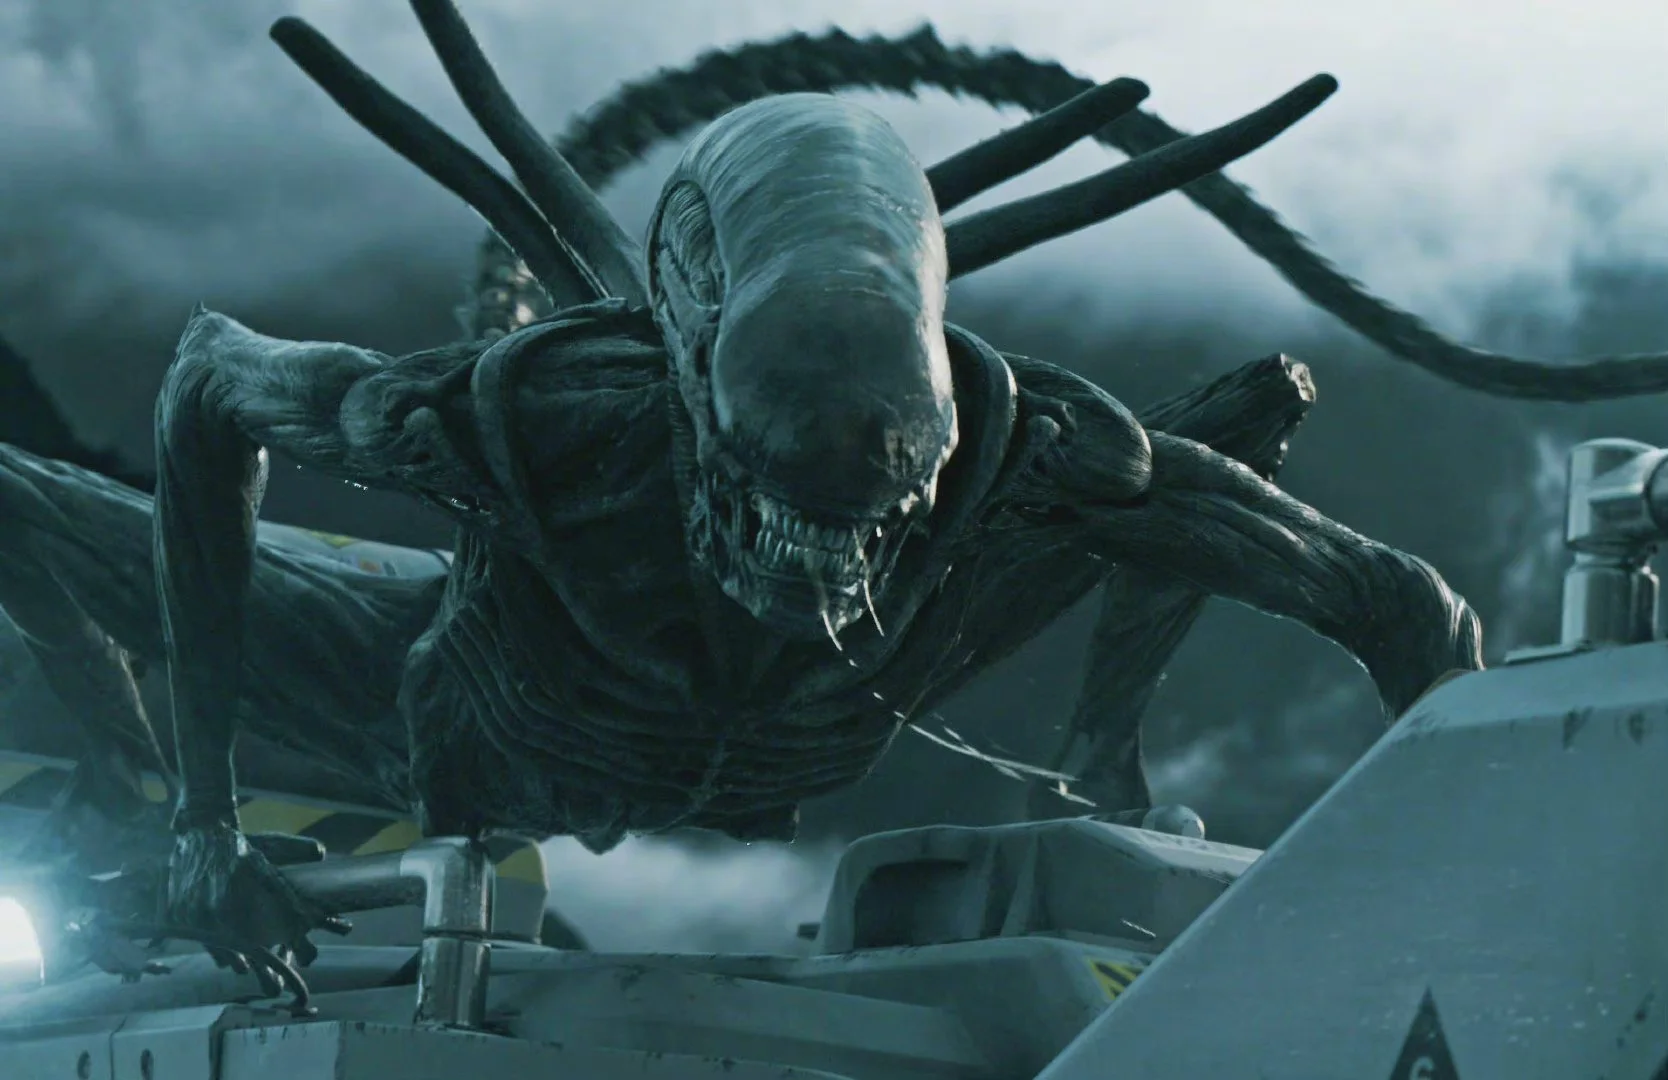 Federico Alvarez to collaborate with Ridley Scott on "Untitled Alien: Covenant Sequel"